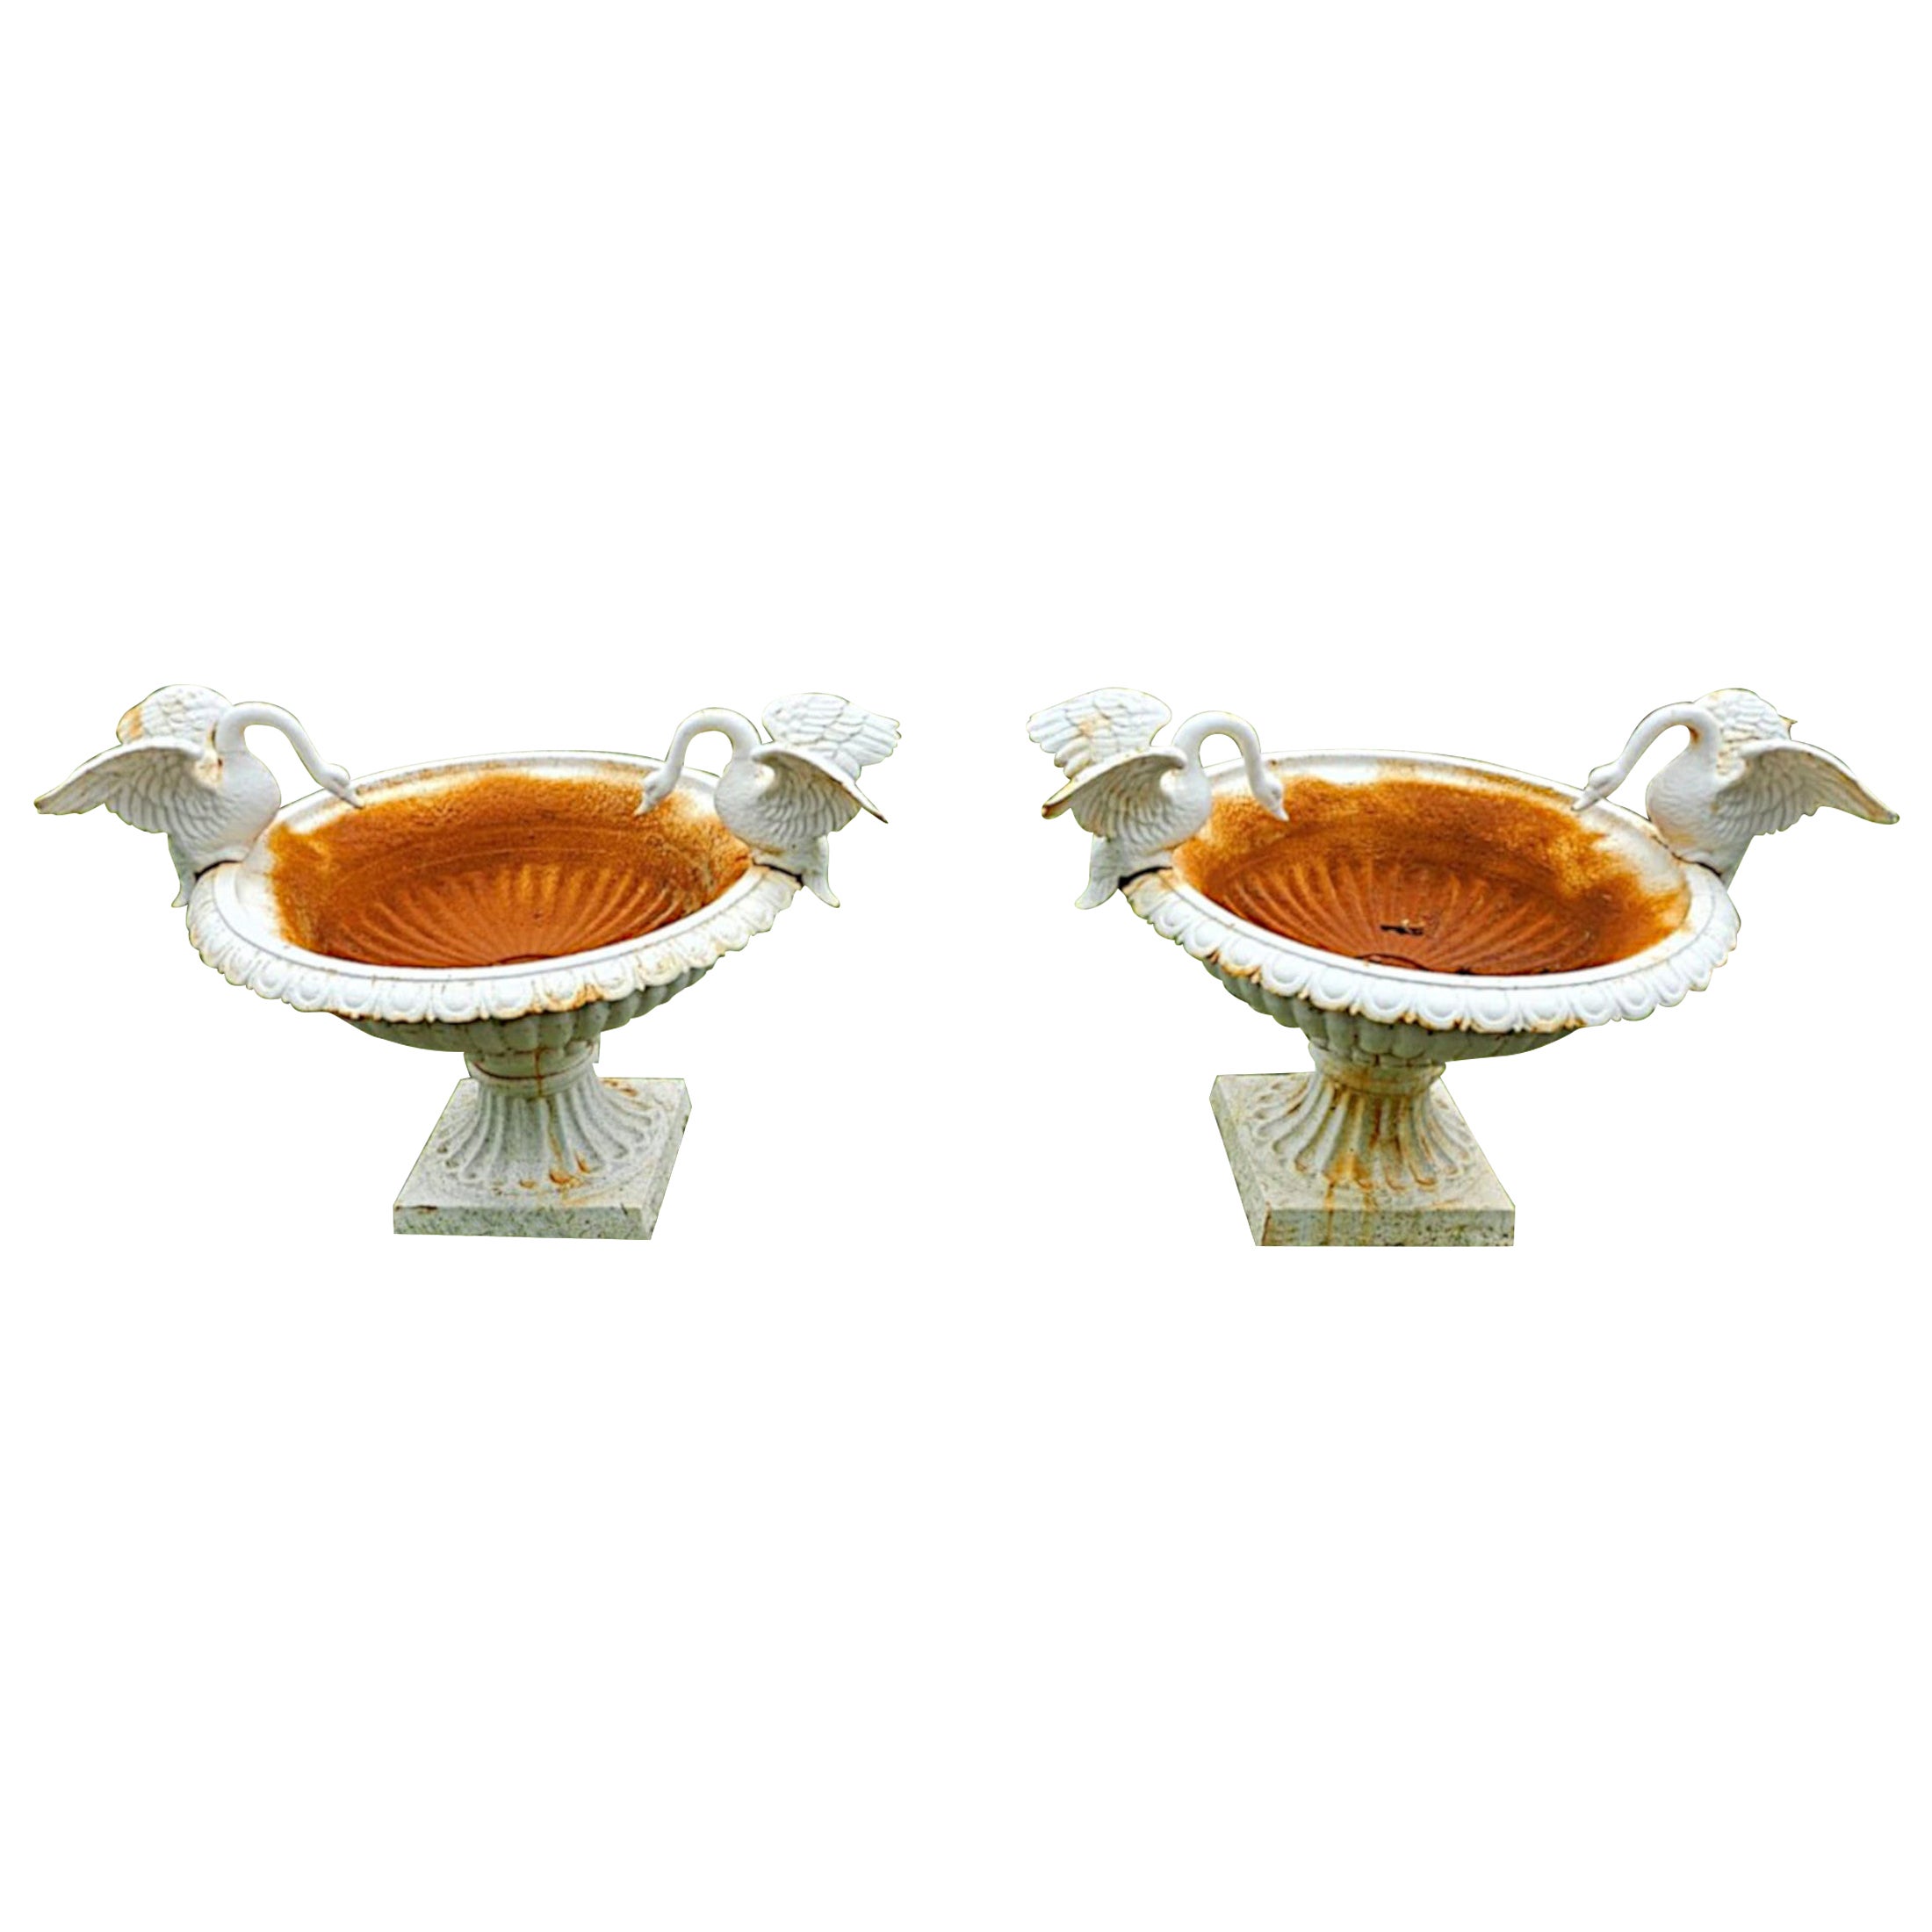 A Stunning 20th Century Pair of Large Cast Iron Urns with Swan Detail 